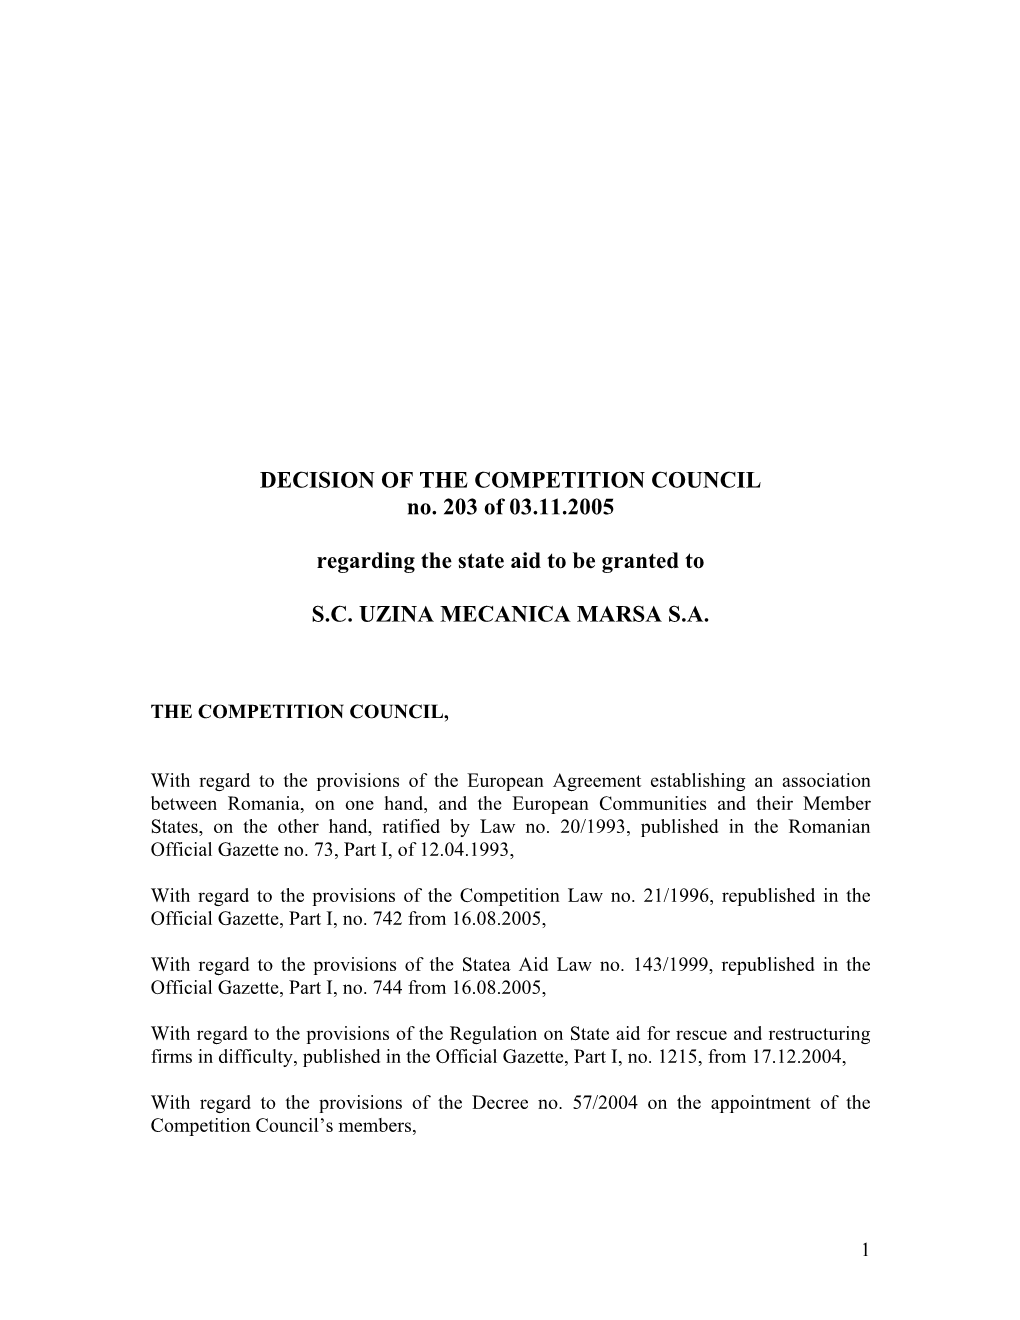 DECISION of the COMPETITION COUNCIL No. 203 of 03.11.2005 Regarding the State Aid to Be Granted to S.C. UZINA MECANICA MARSA S